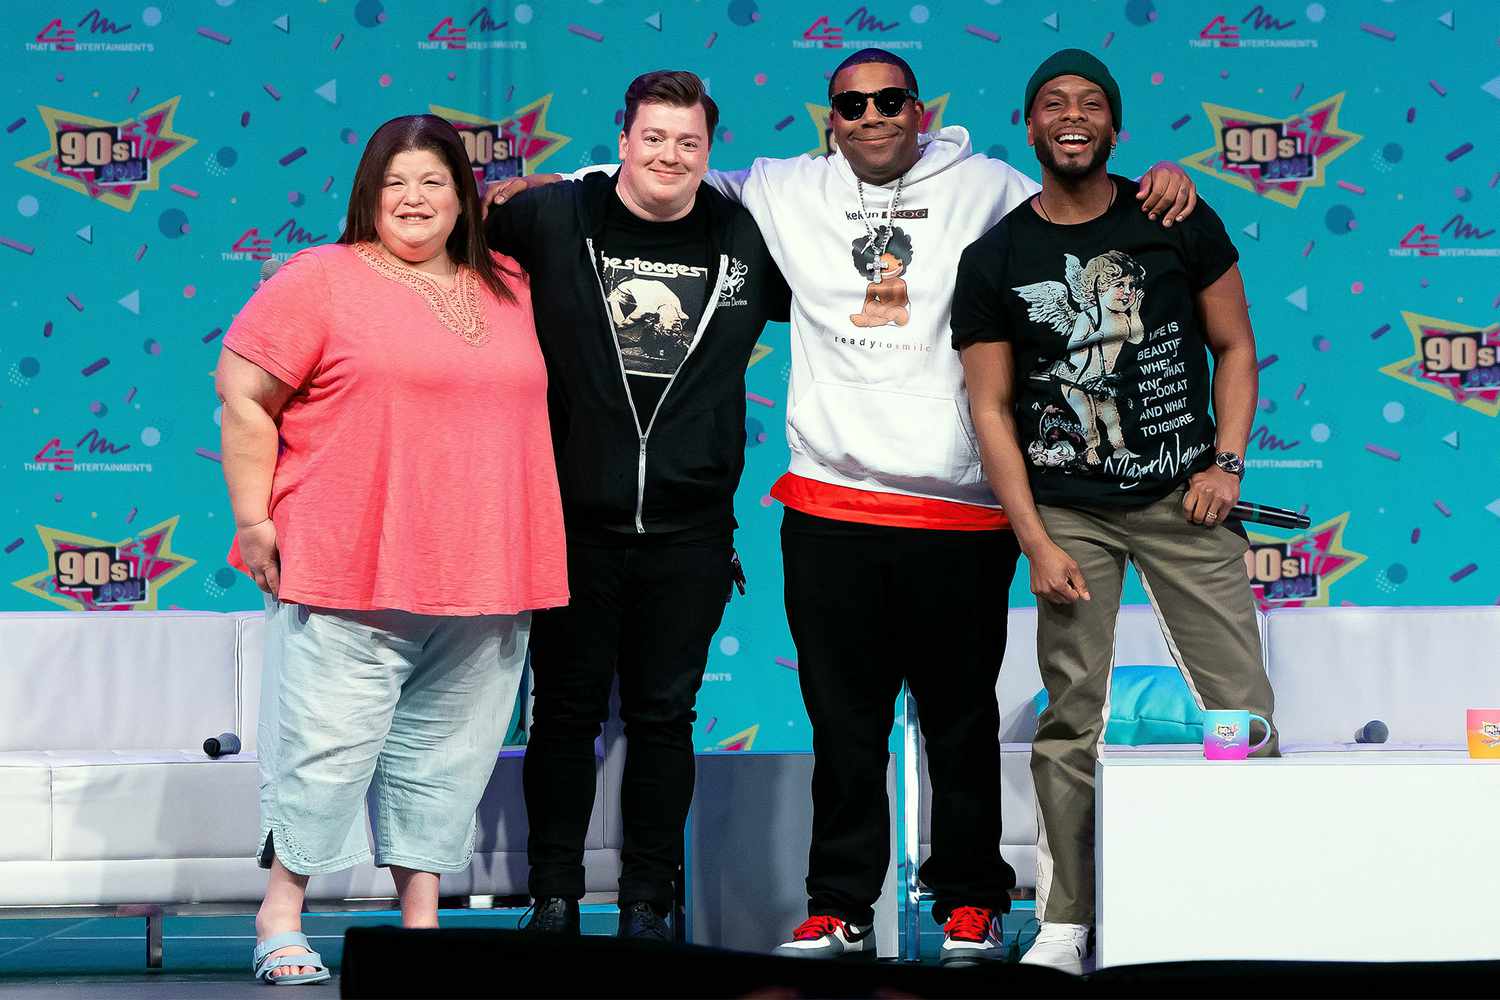 'All That' stars Lori Beth Denberg, Danny Tamberelli, Kenan Thompson, and Kel Mitchell at '90s Con on March 18, 2023 Photo Credit: Nick Cinea, courtesy of Thats4Entertainment